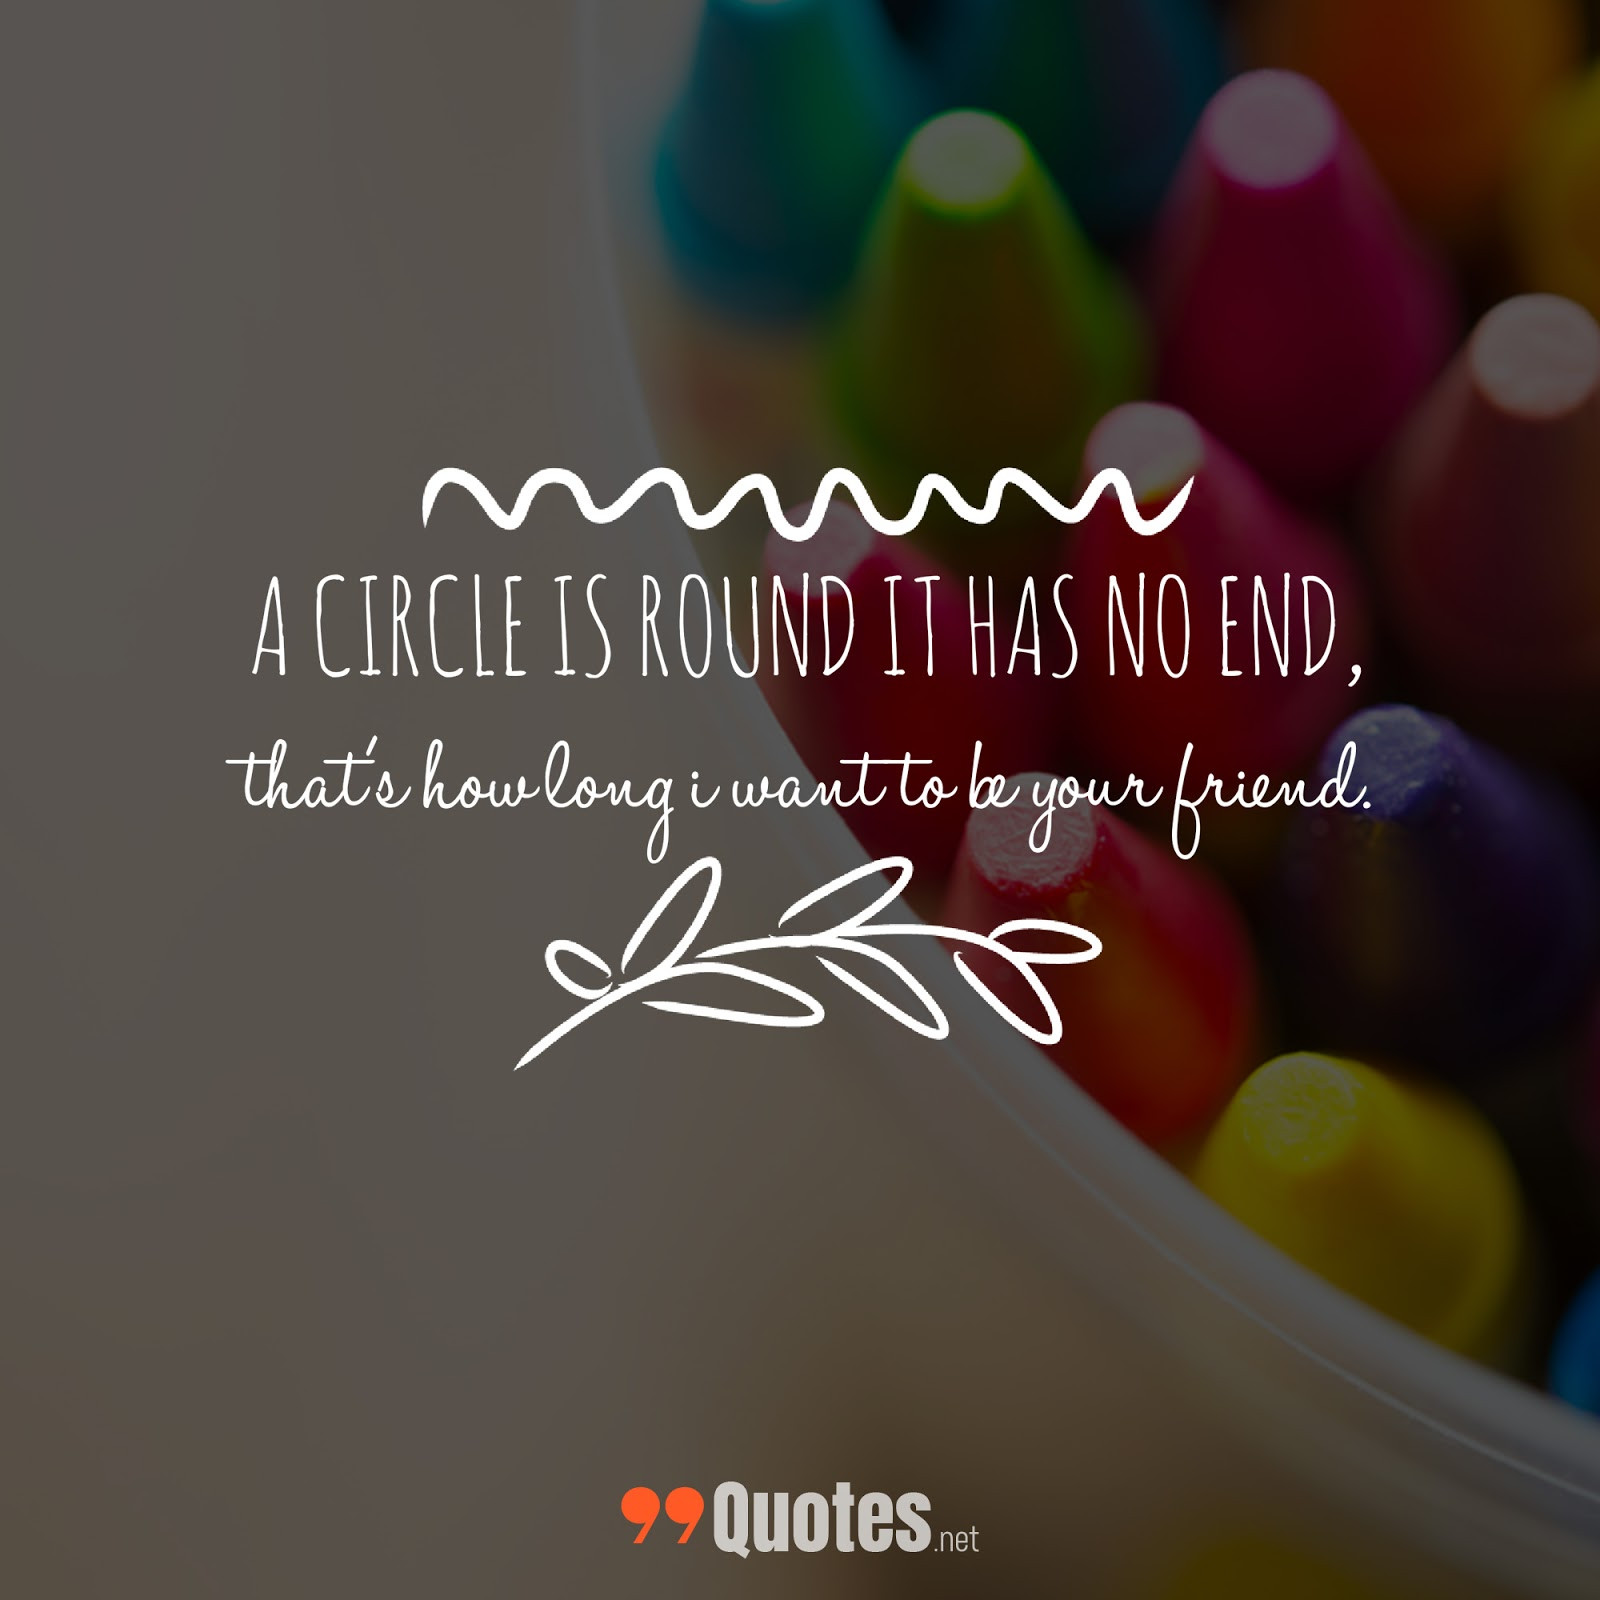 Short And Sweet Friendship Quotes
 99 Cute Short Friendship Quotes You Will Love [with images]